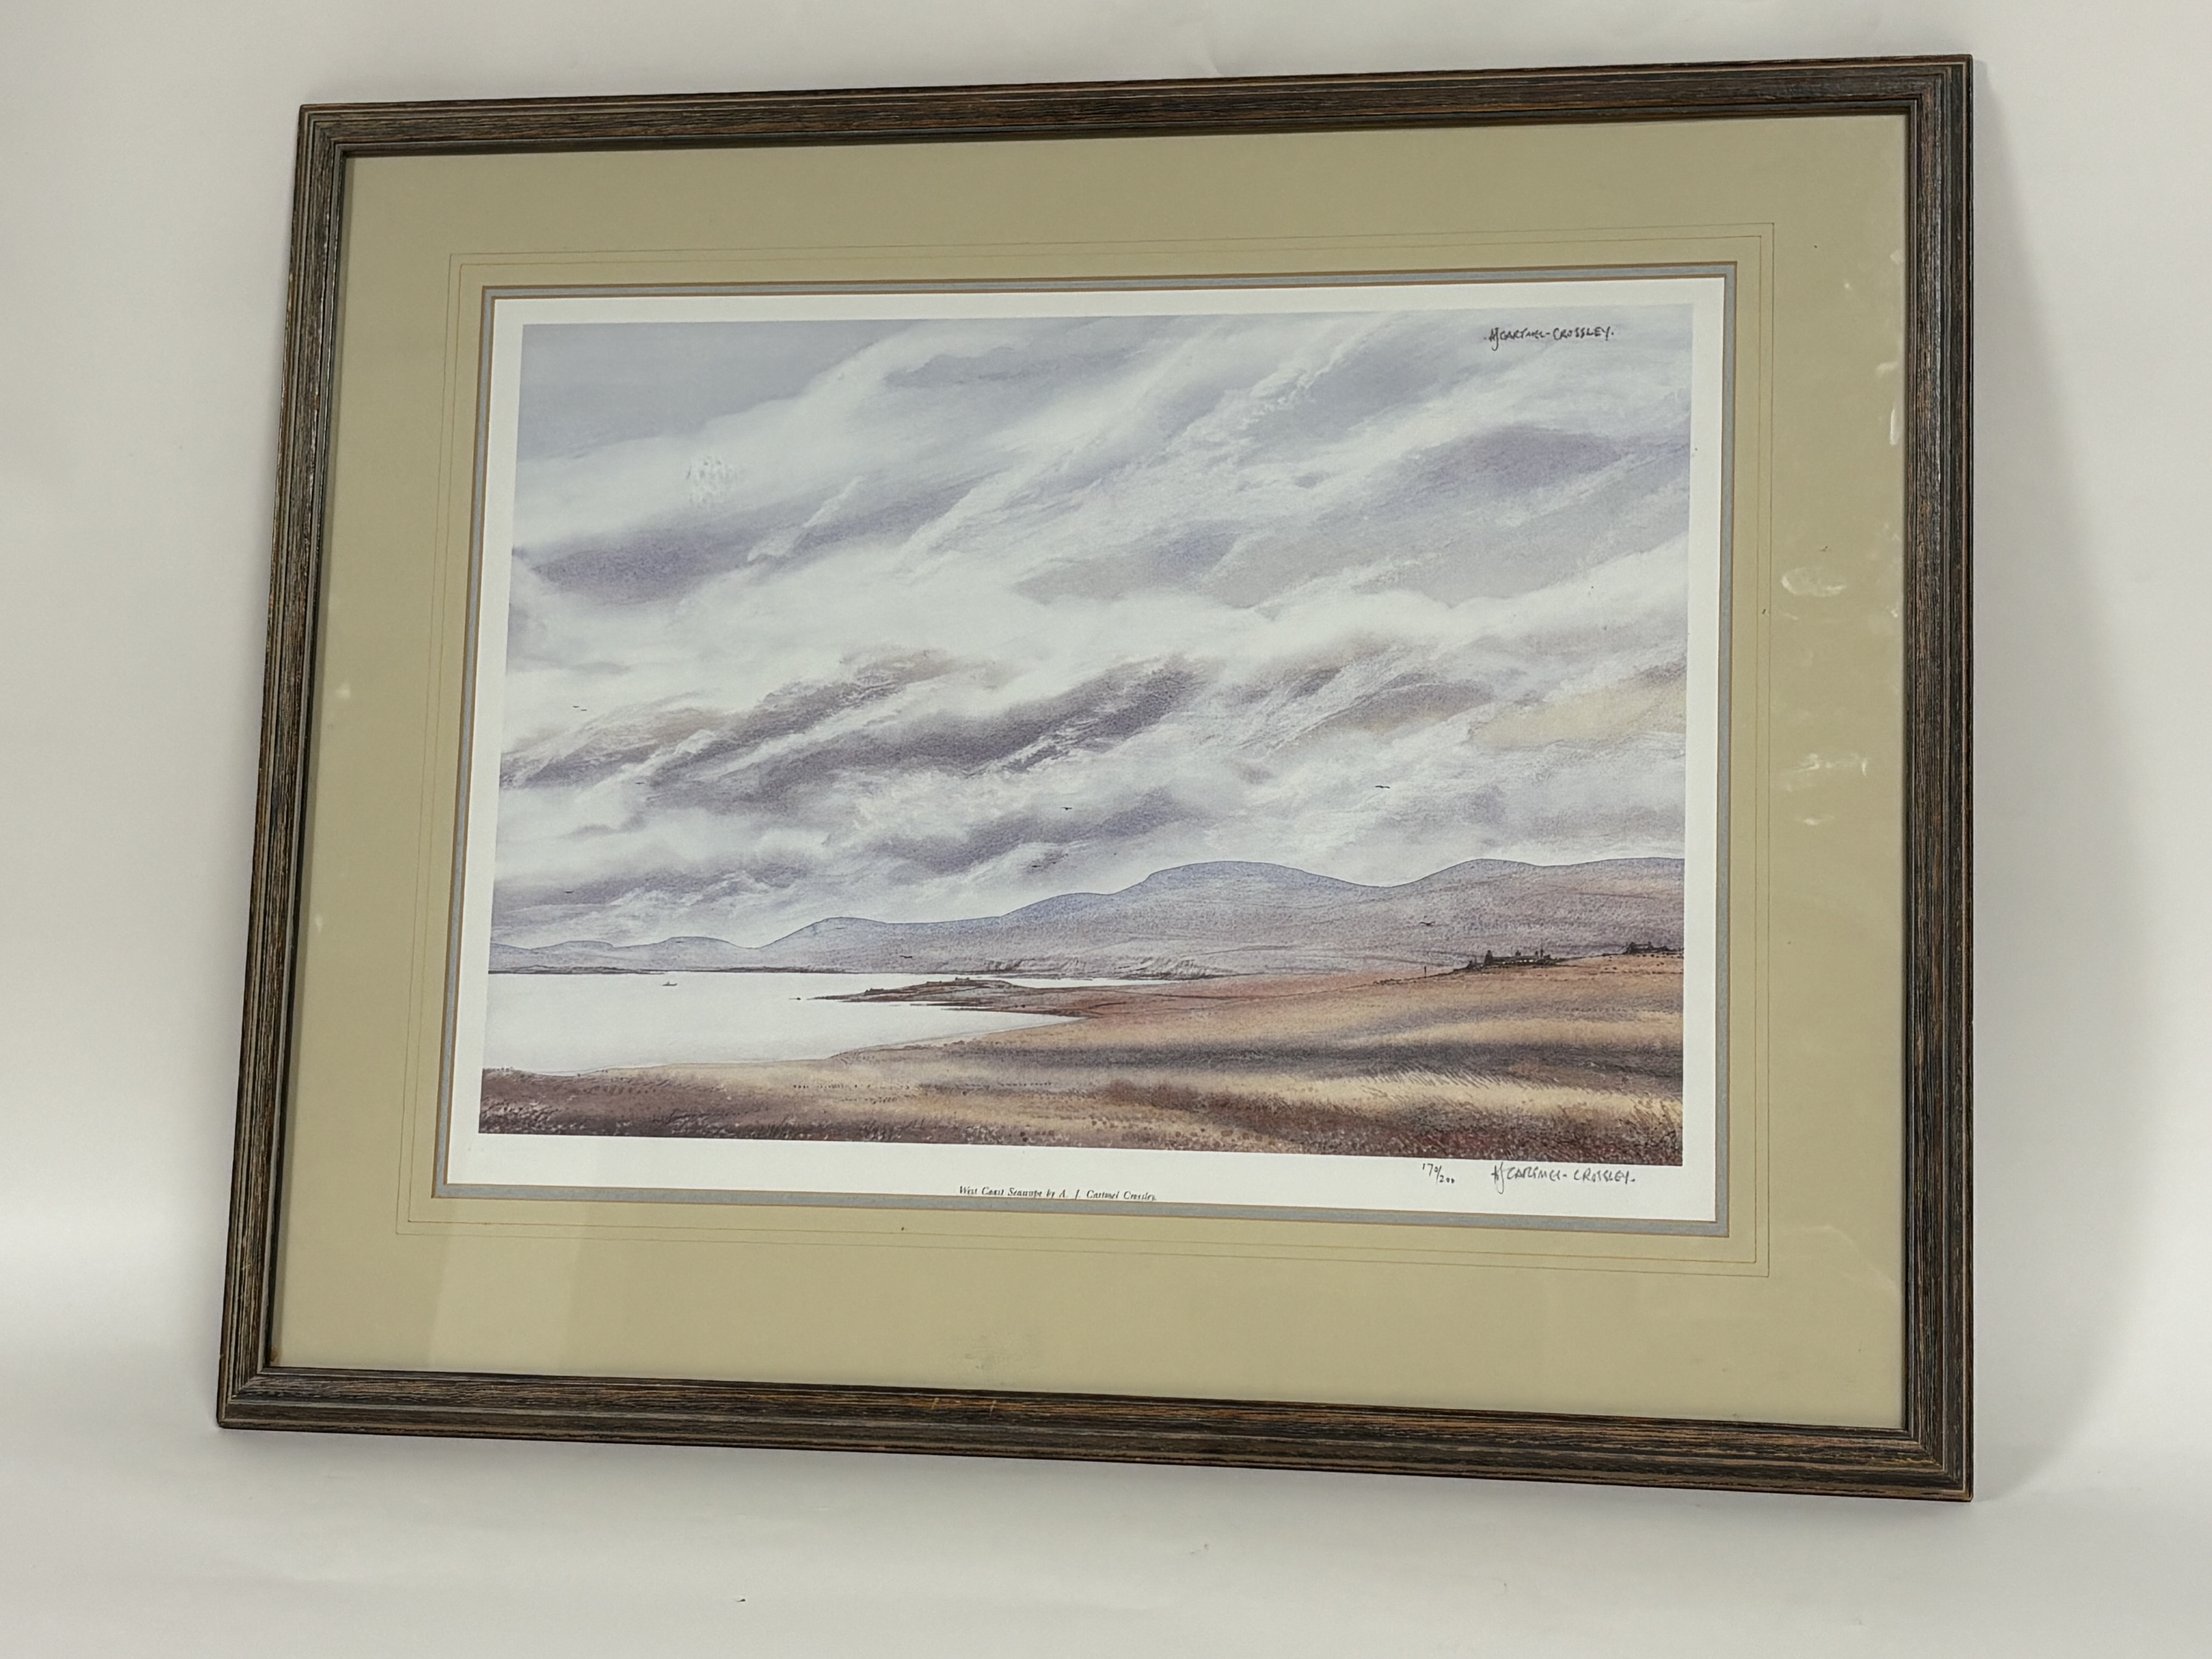 A.J.Cartmell Crossley, West Coast Seascape, print 170/200, signed, titled bellow, gallery stamp